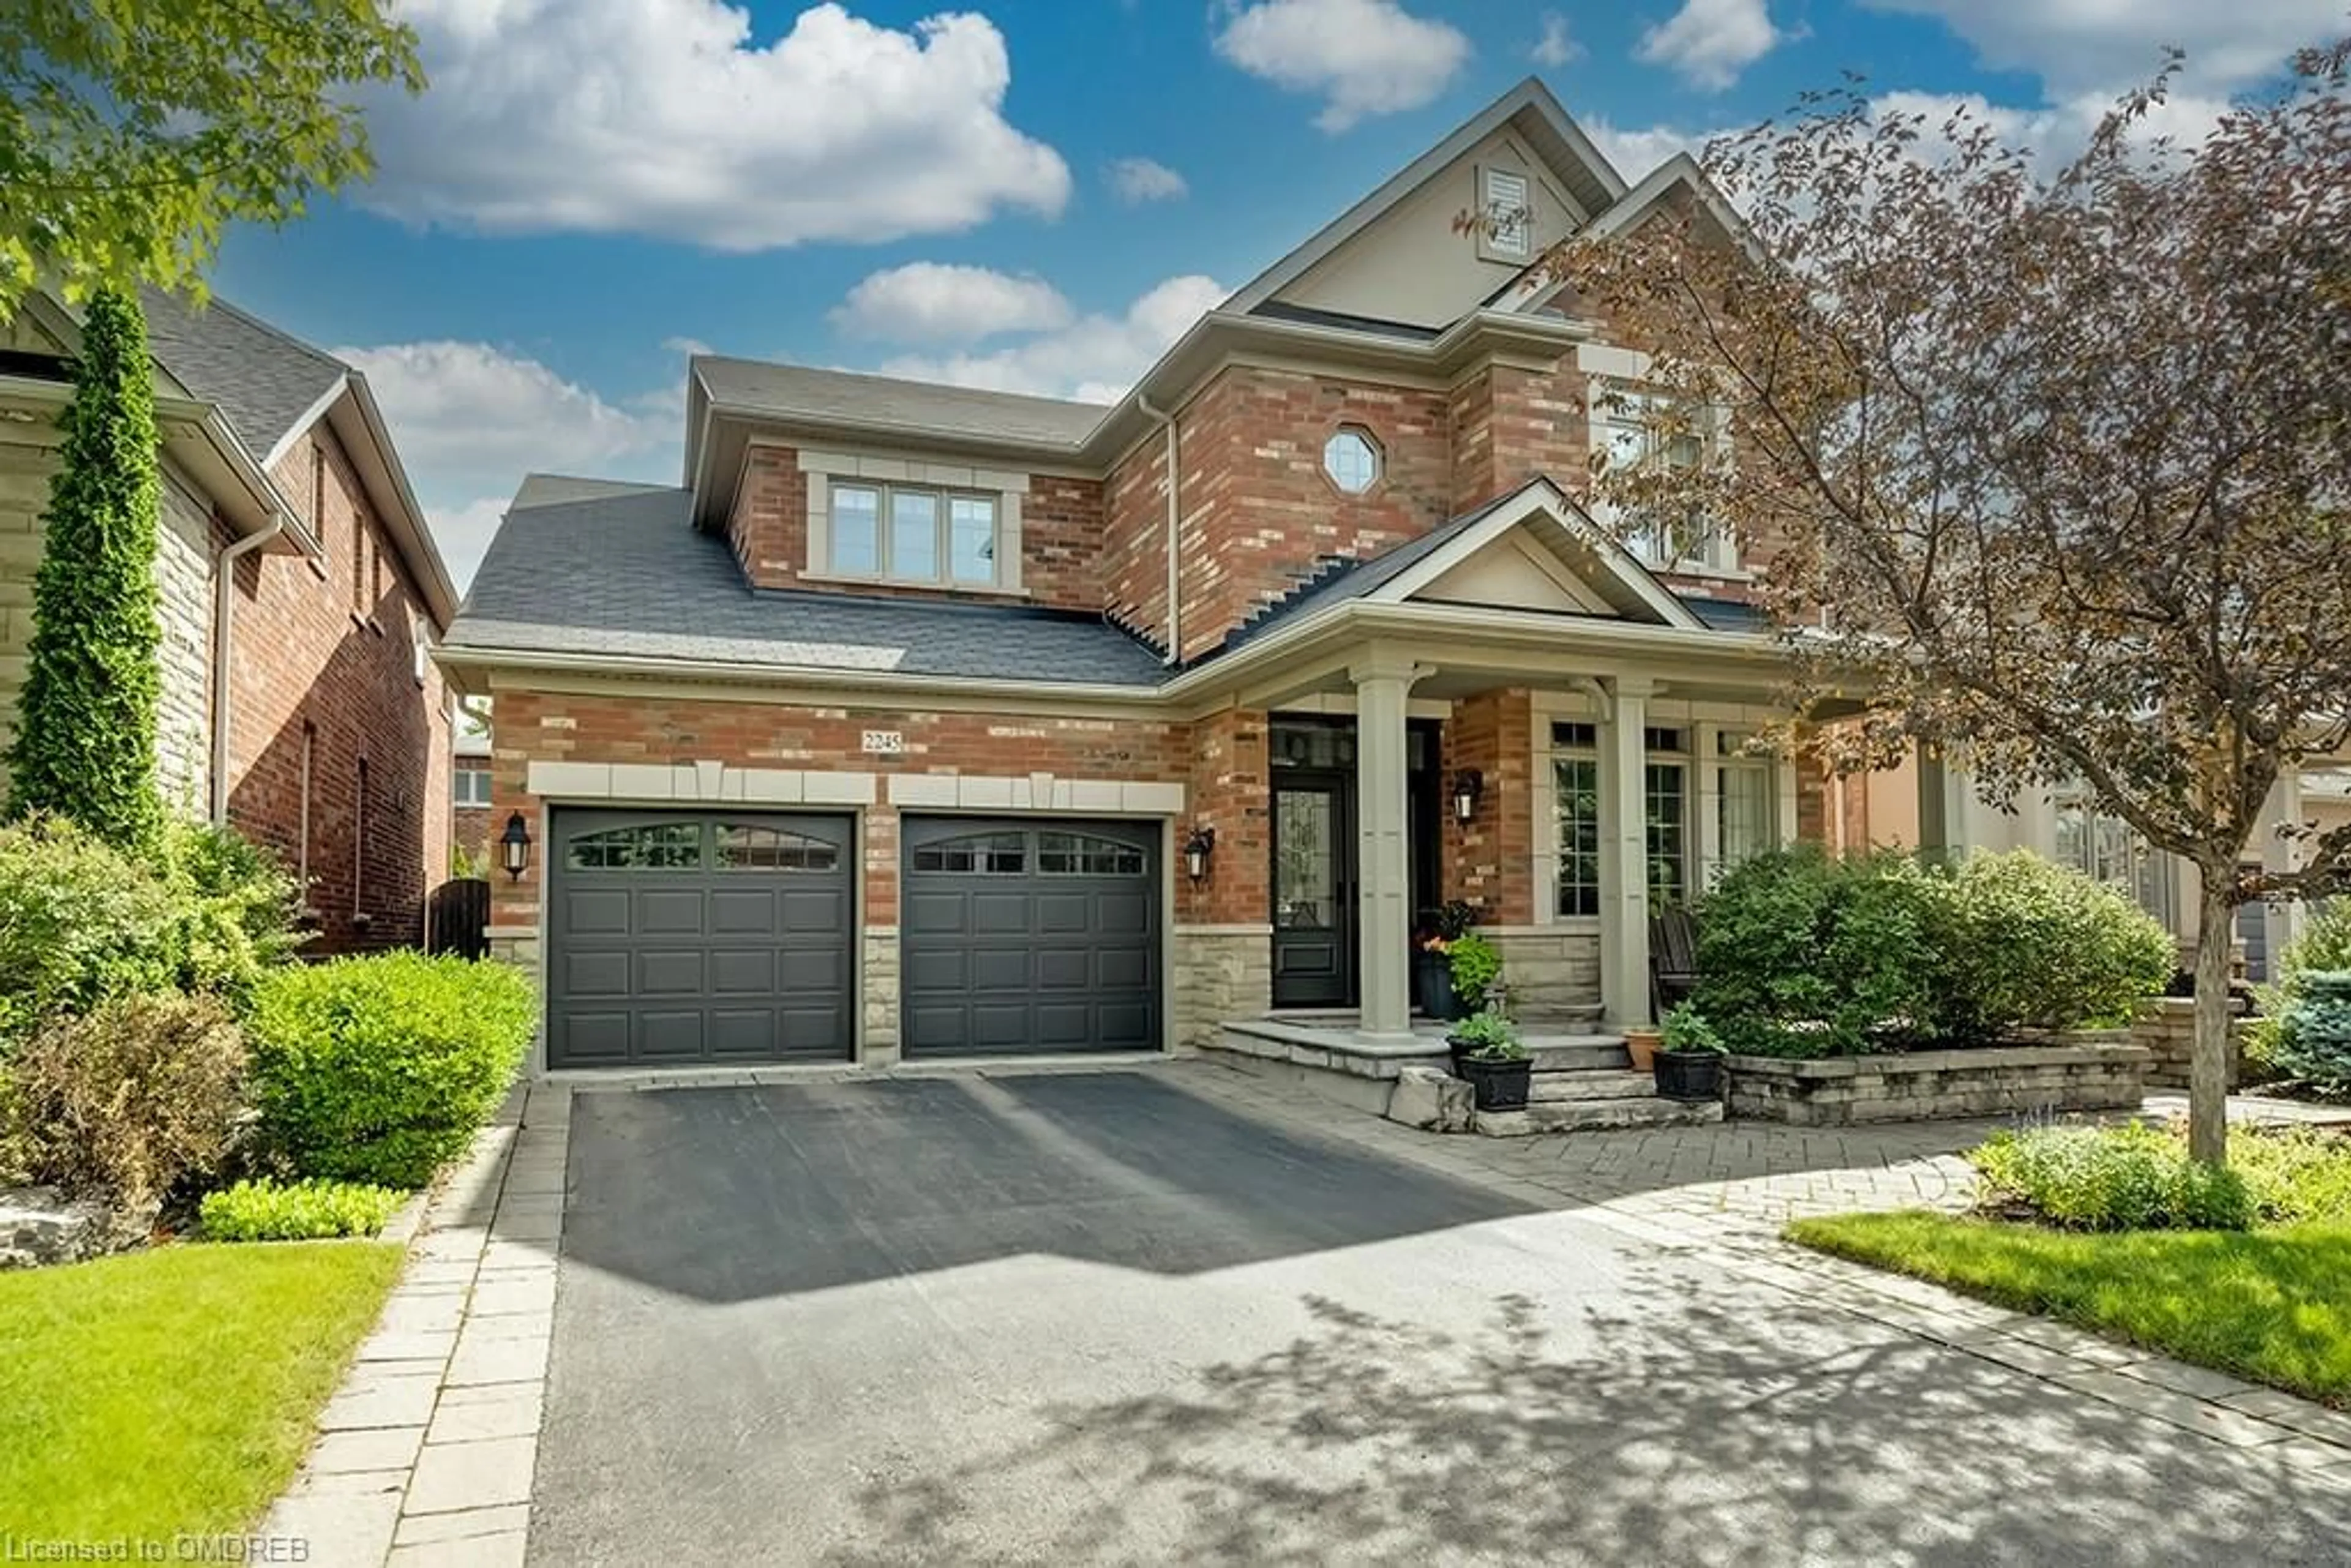 Home with brick exterior material for 2245 Millstone Dr, Oakville Ontario L6M 0H2